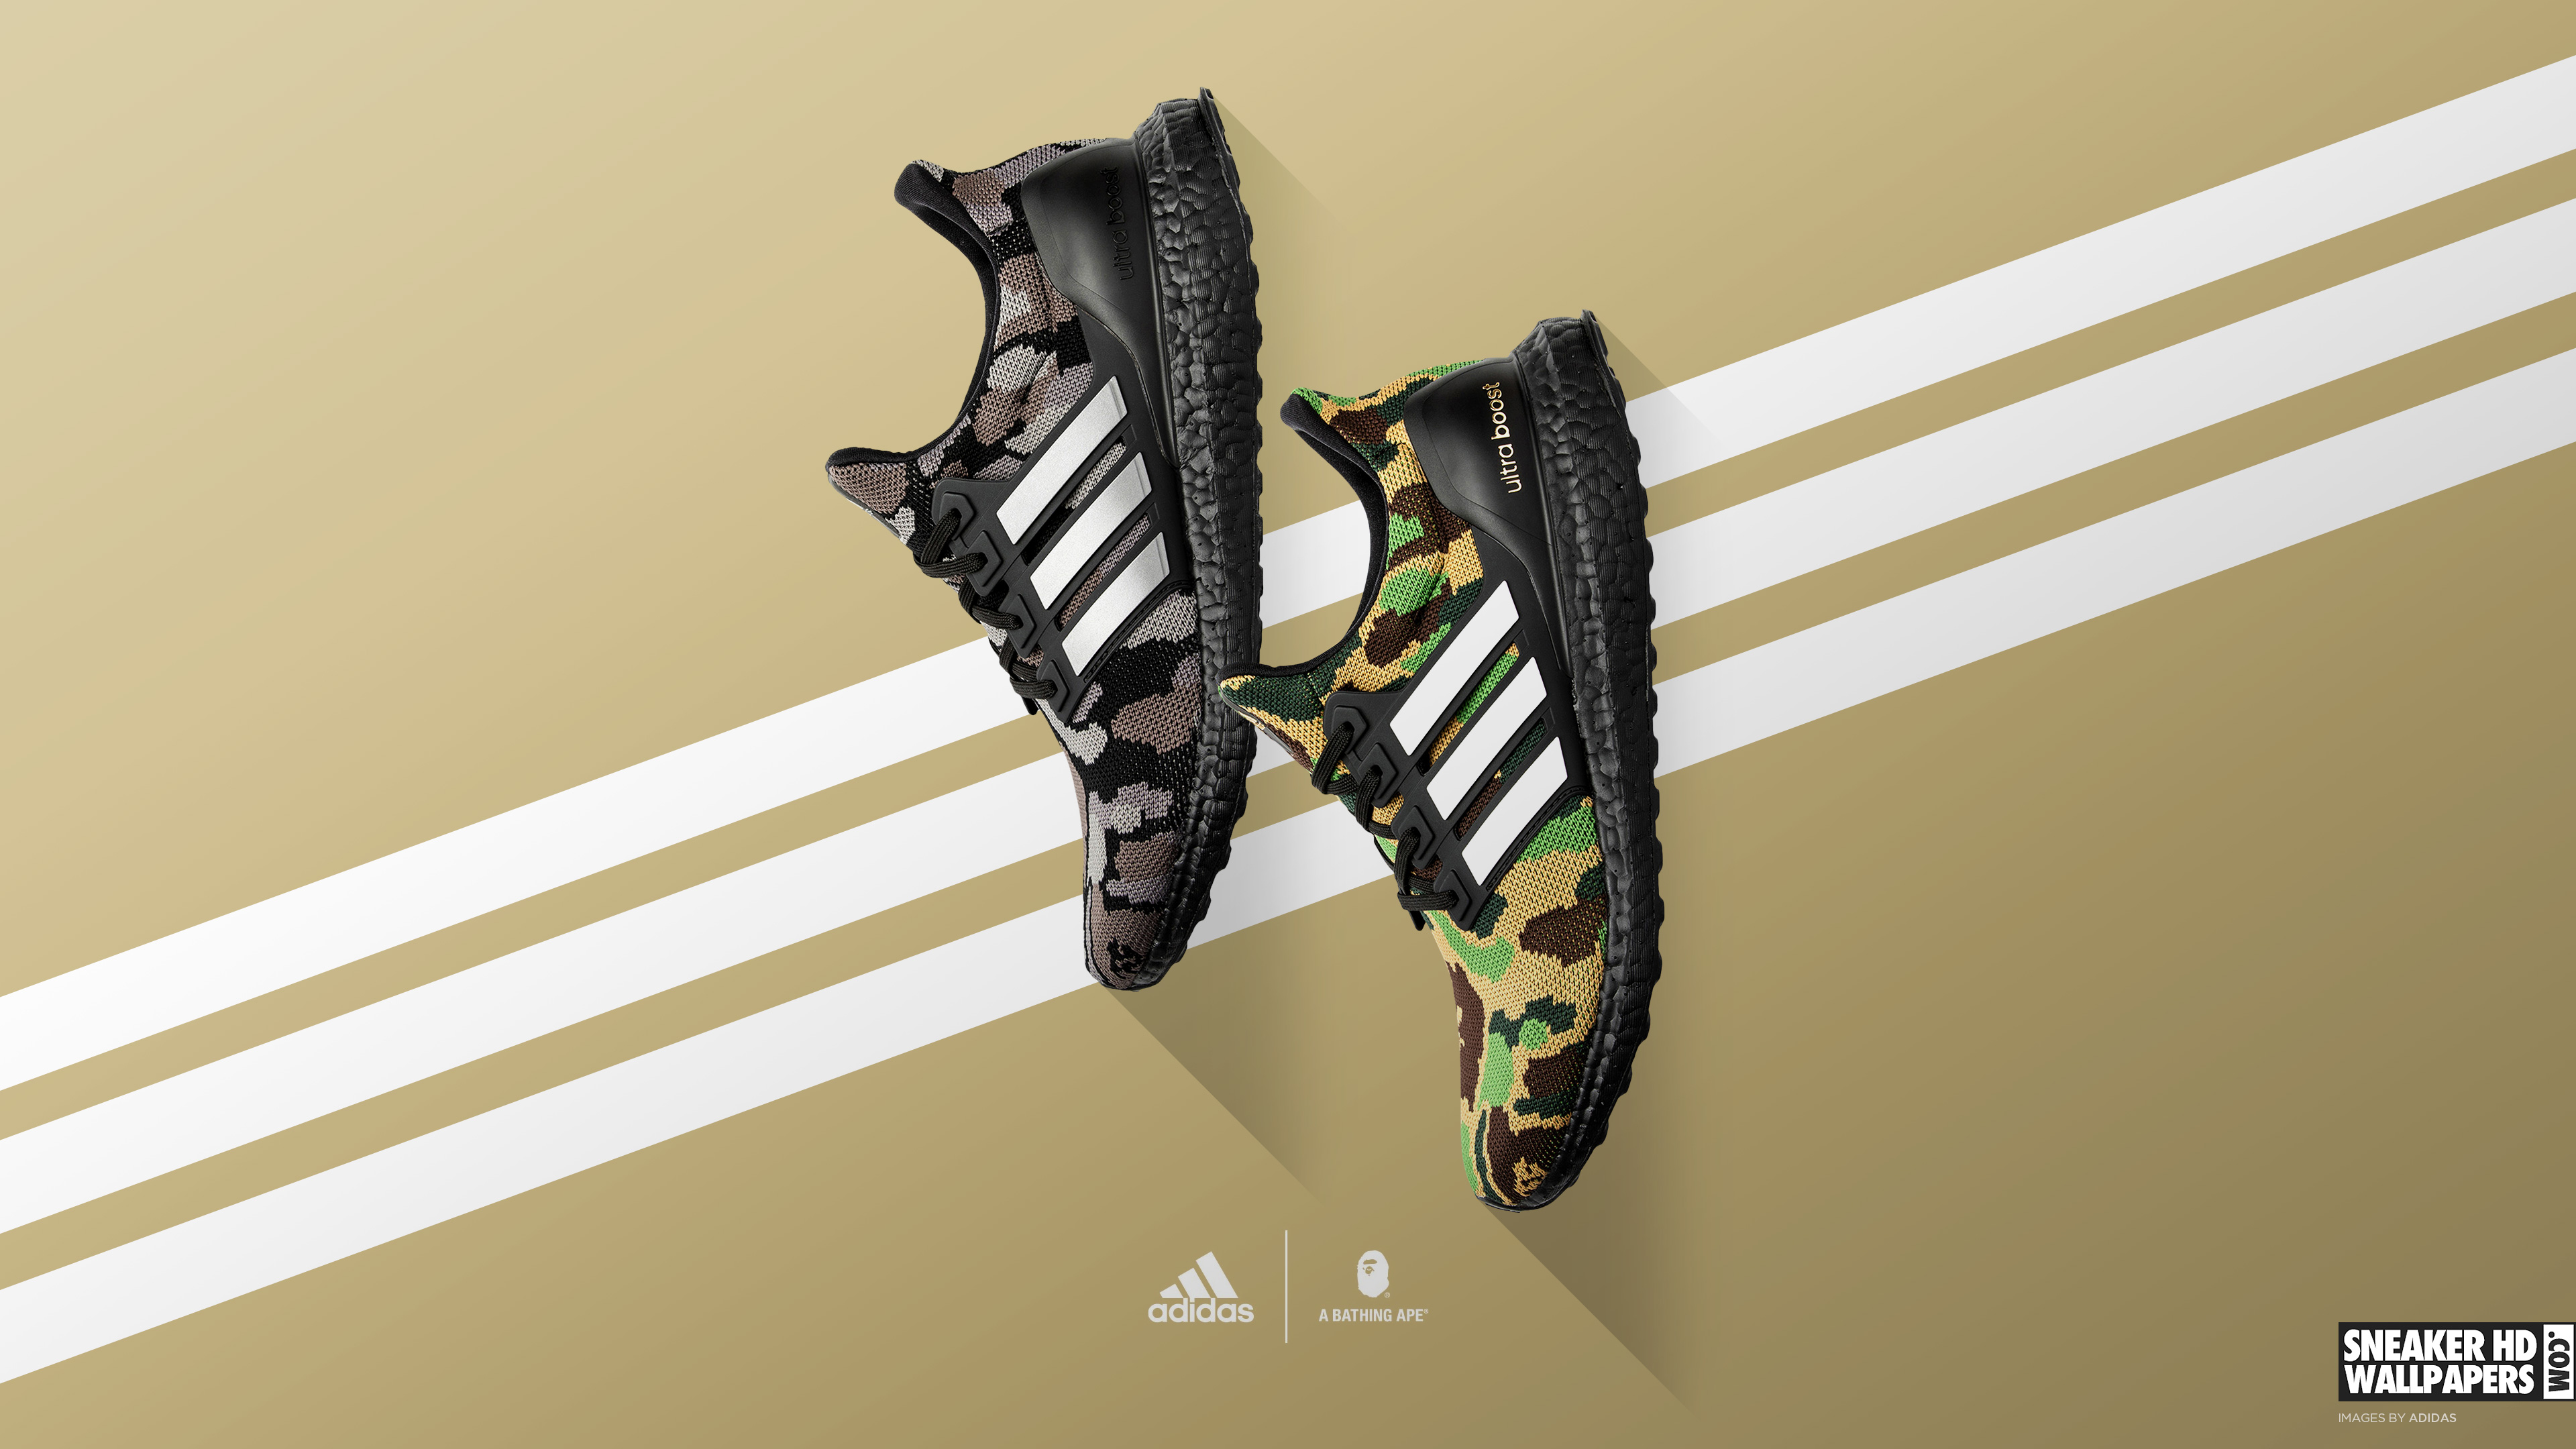  – Your favorite sneakers in 4K, Retina, Mobile and  HD wallpaper resolutions! Adidas Ultra Boost Archives -   - Your favorite sneakers in 4K, Retina, Mobile and  HD wallpaper resolutions!